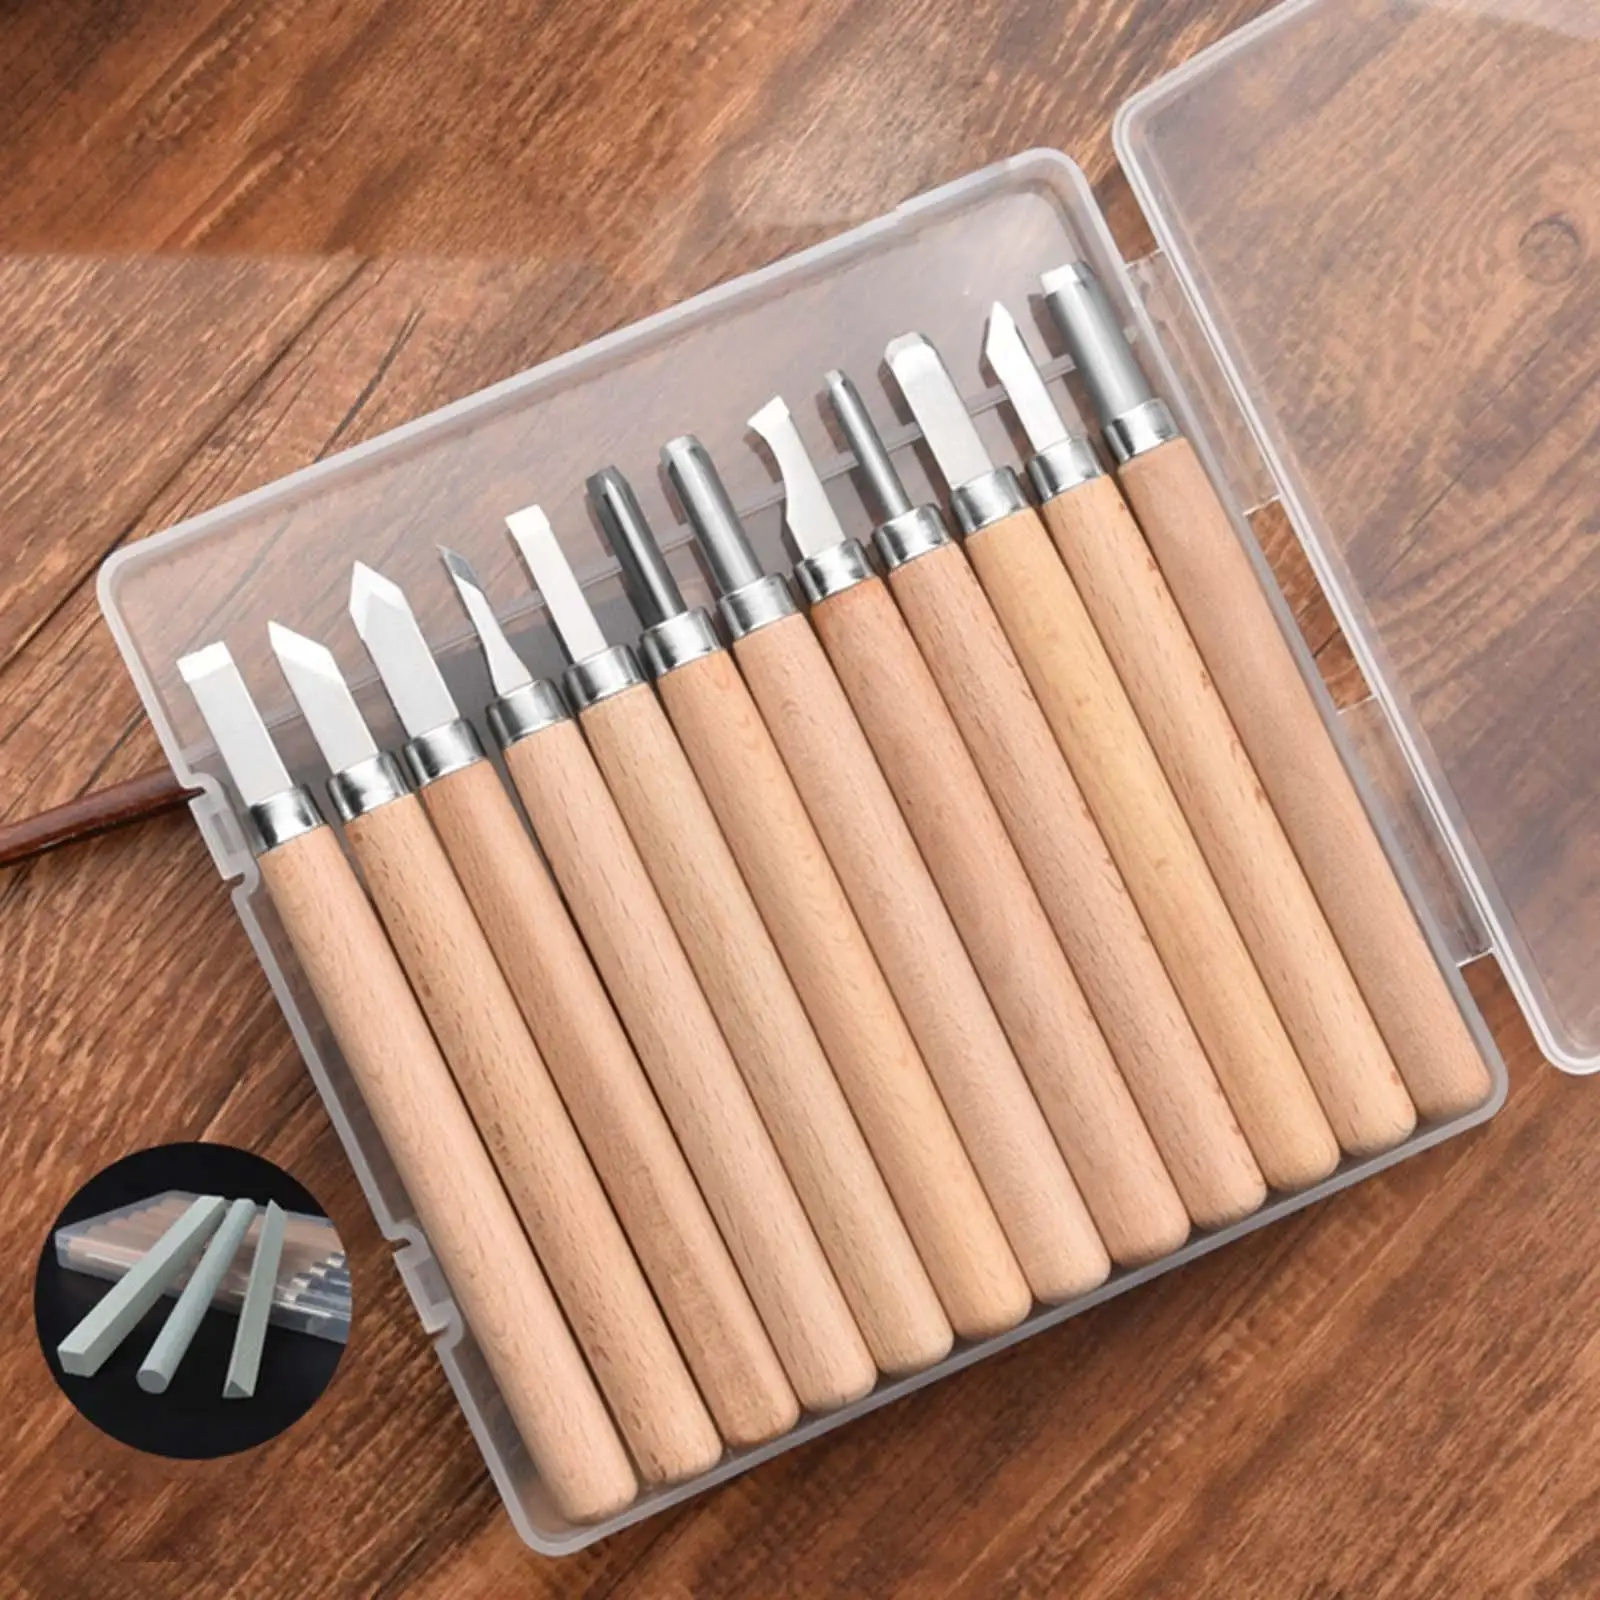 12Pcs Wood Carving Chisel Set Woodworking Wood Handle Tools Carver Set for Beginners Cutting Wood Blocks Project Softwoods